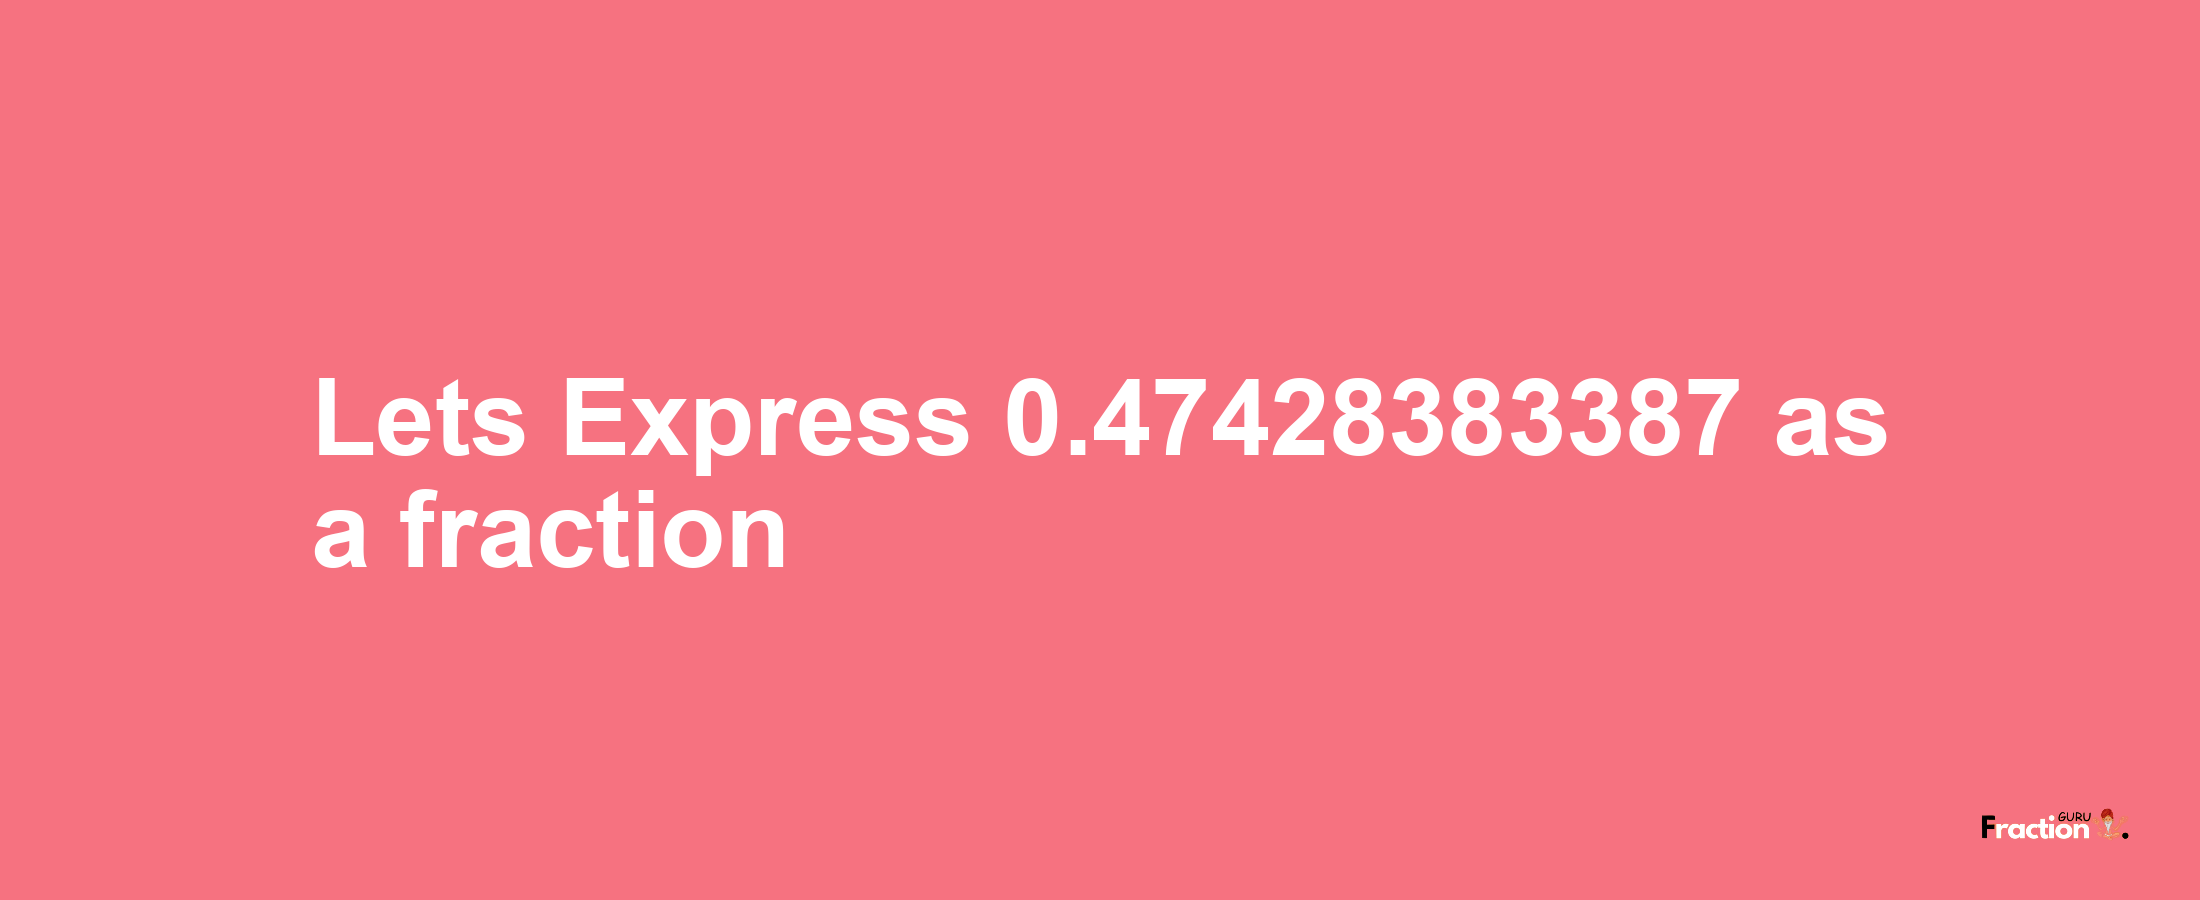 Lets Express 0.47428383387 as afraction